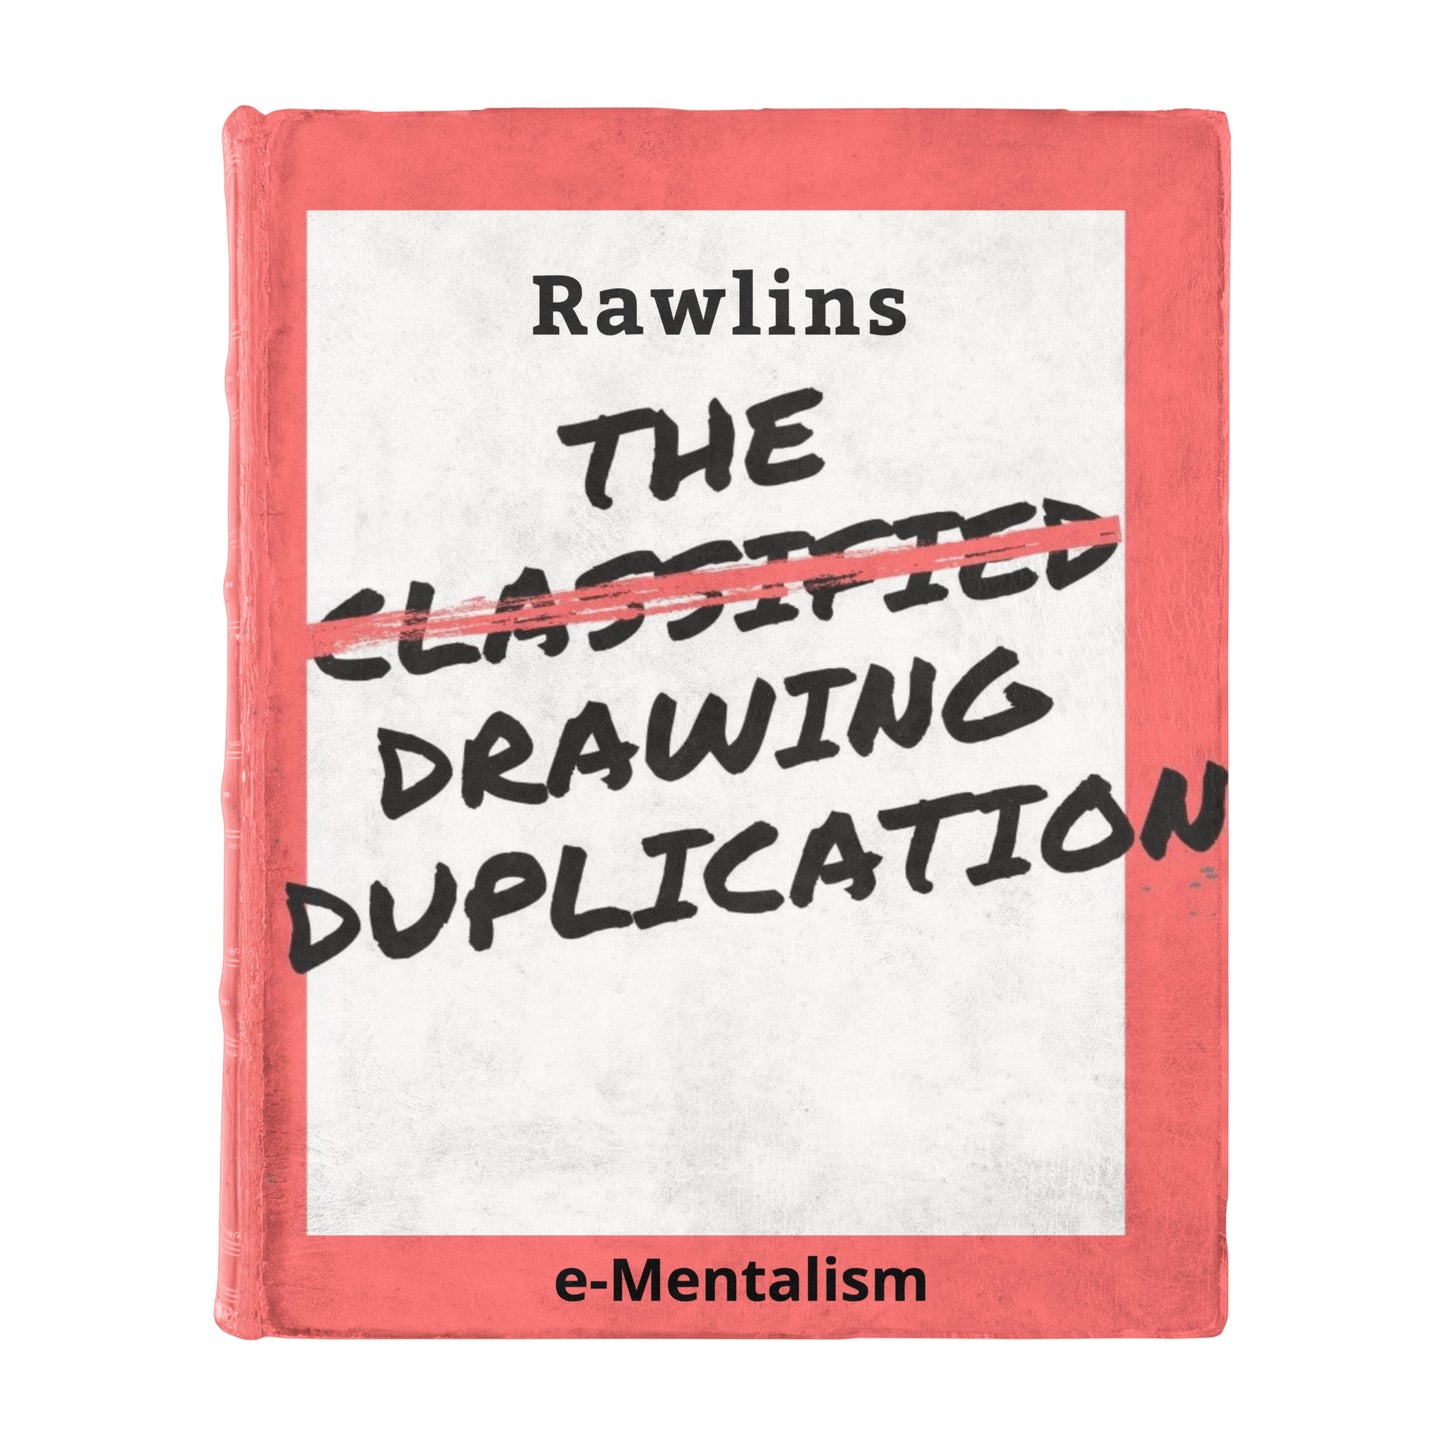 The Classified Drawing Duplication by Chris Rawlins (eBook)